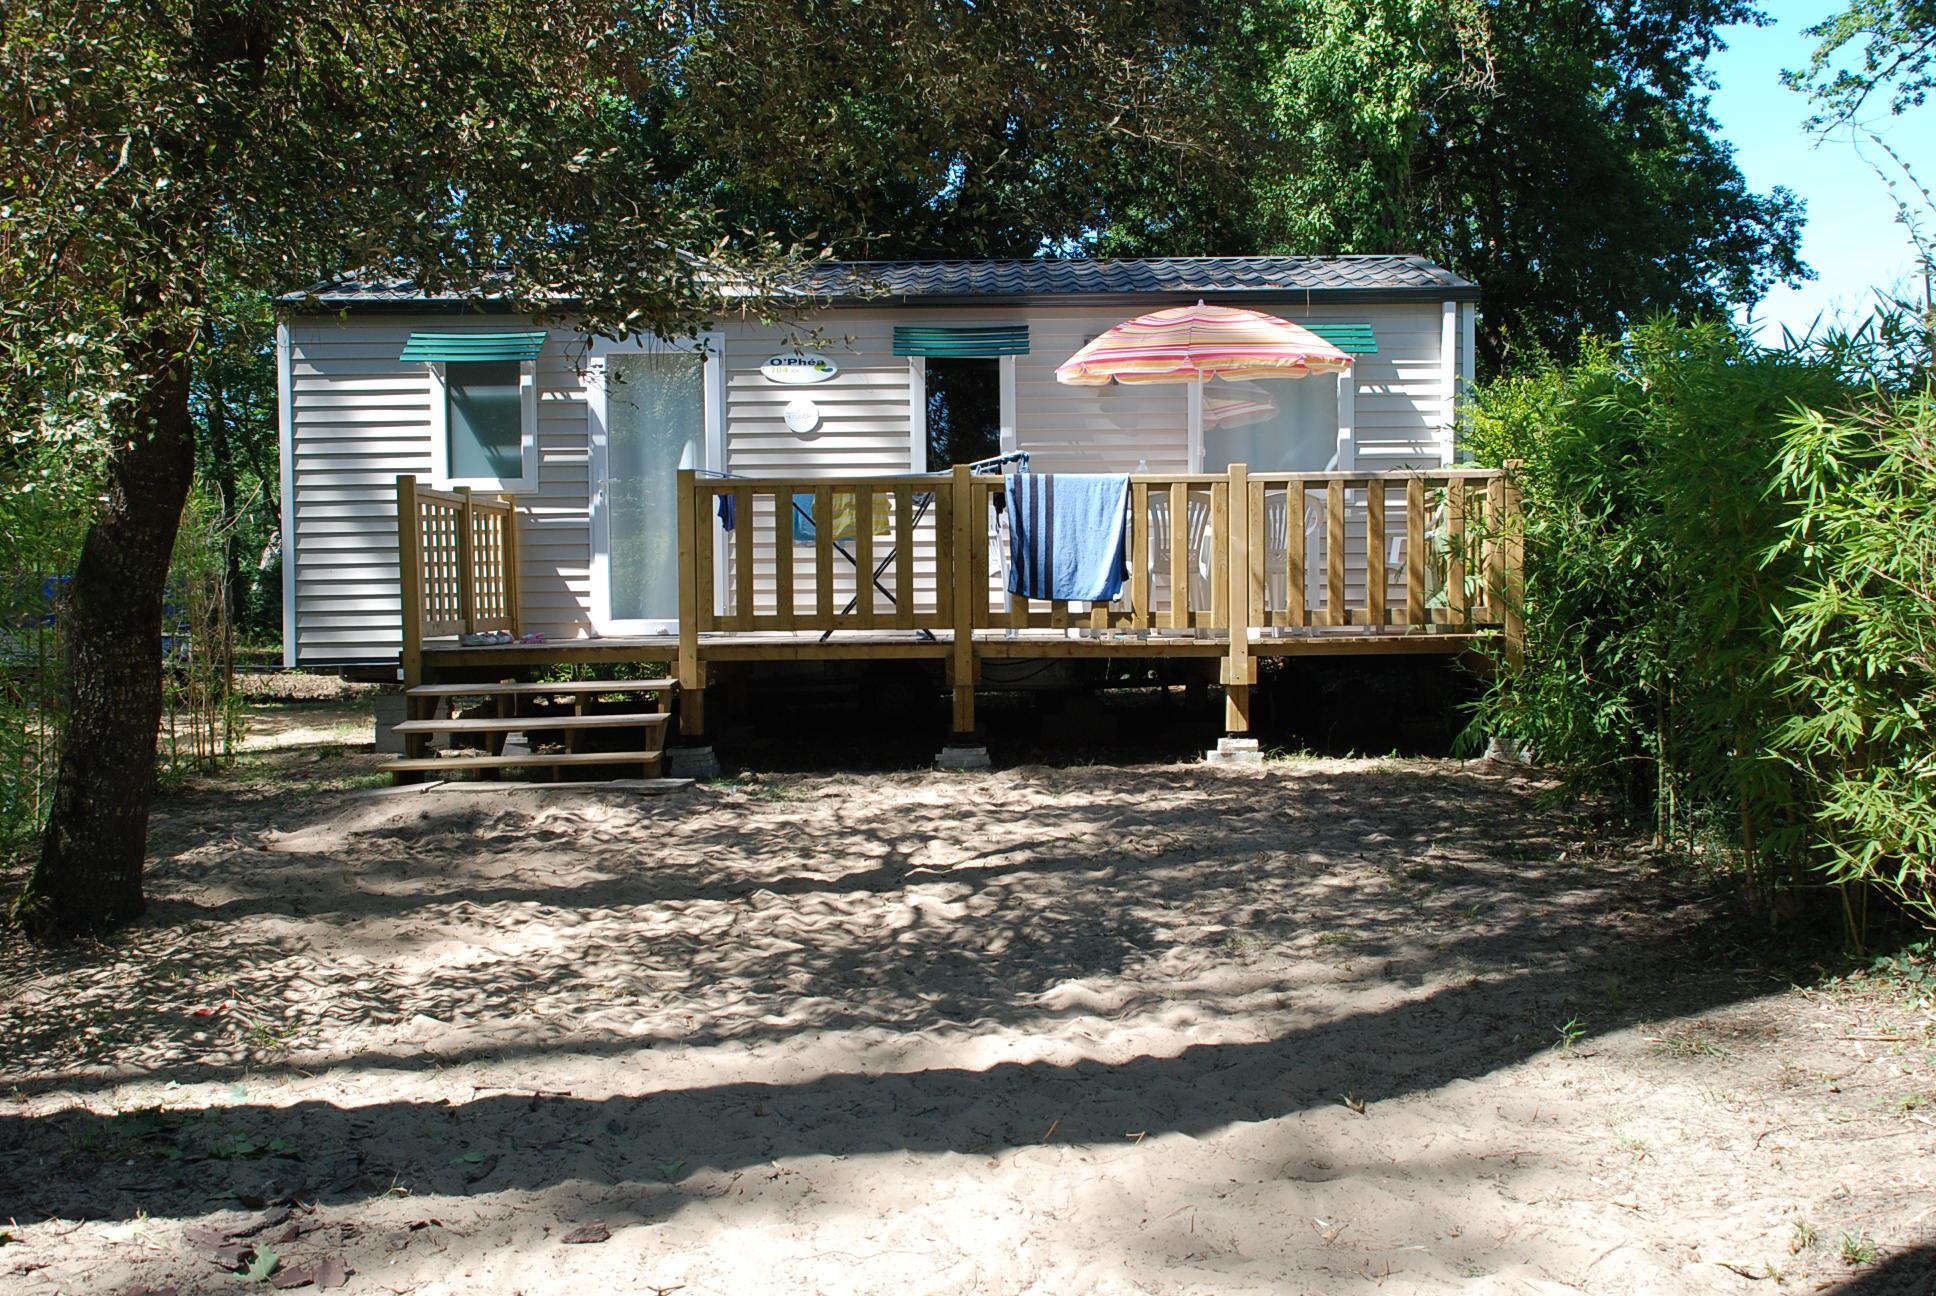 Accommodation - Mobilhome 3 Bedrooms / Semi-Covered Wooden Terrace - YELLOH! VILLAGE - CAMPING LA CLAIRIERE